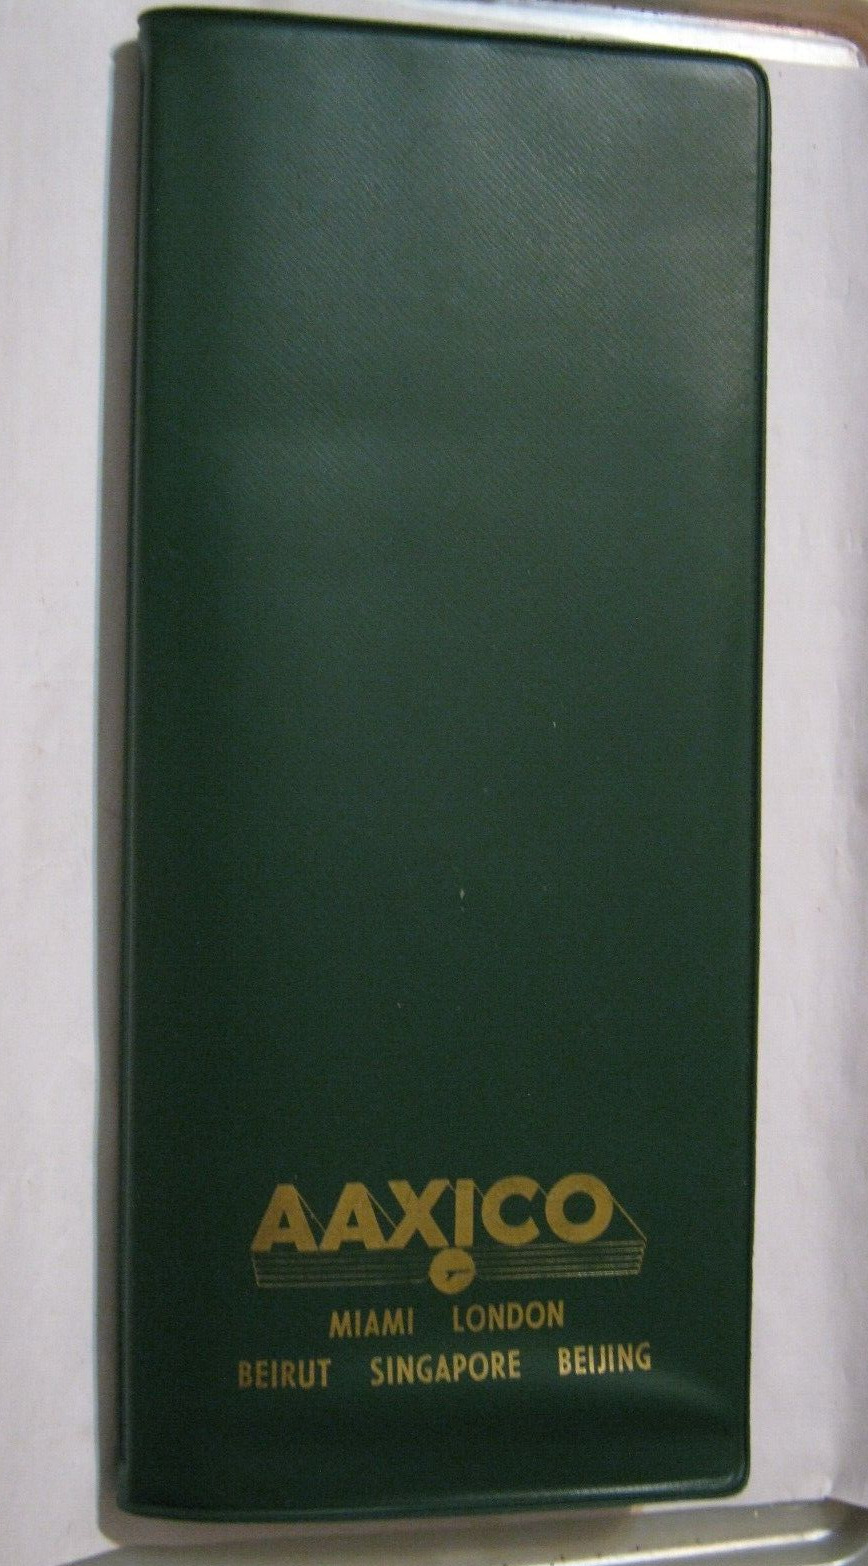 AAXICO Business Card Holder w/ 100+ Airlines/Industry Cards, Eastern, Arrow, etc